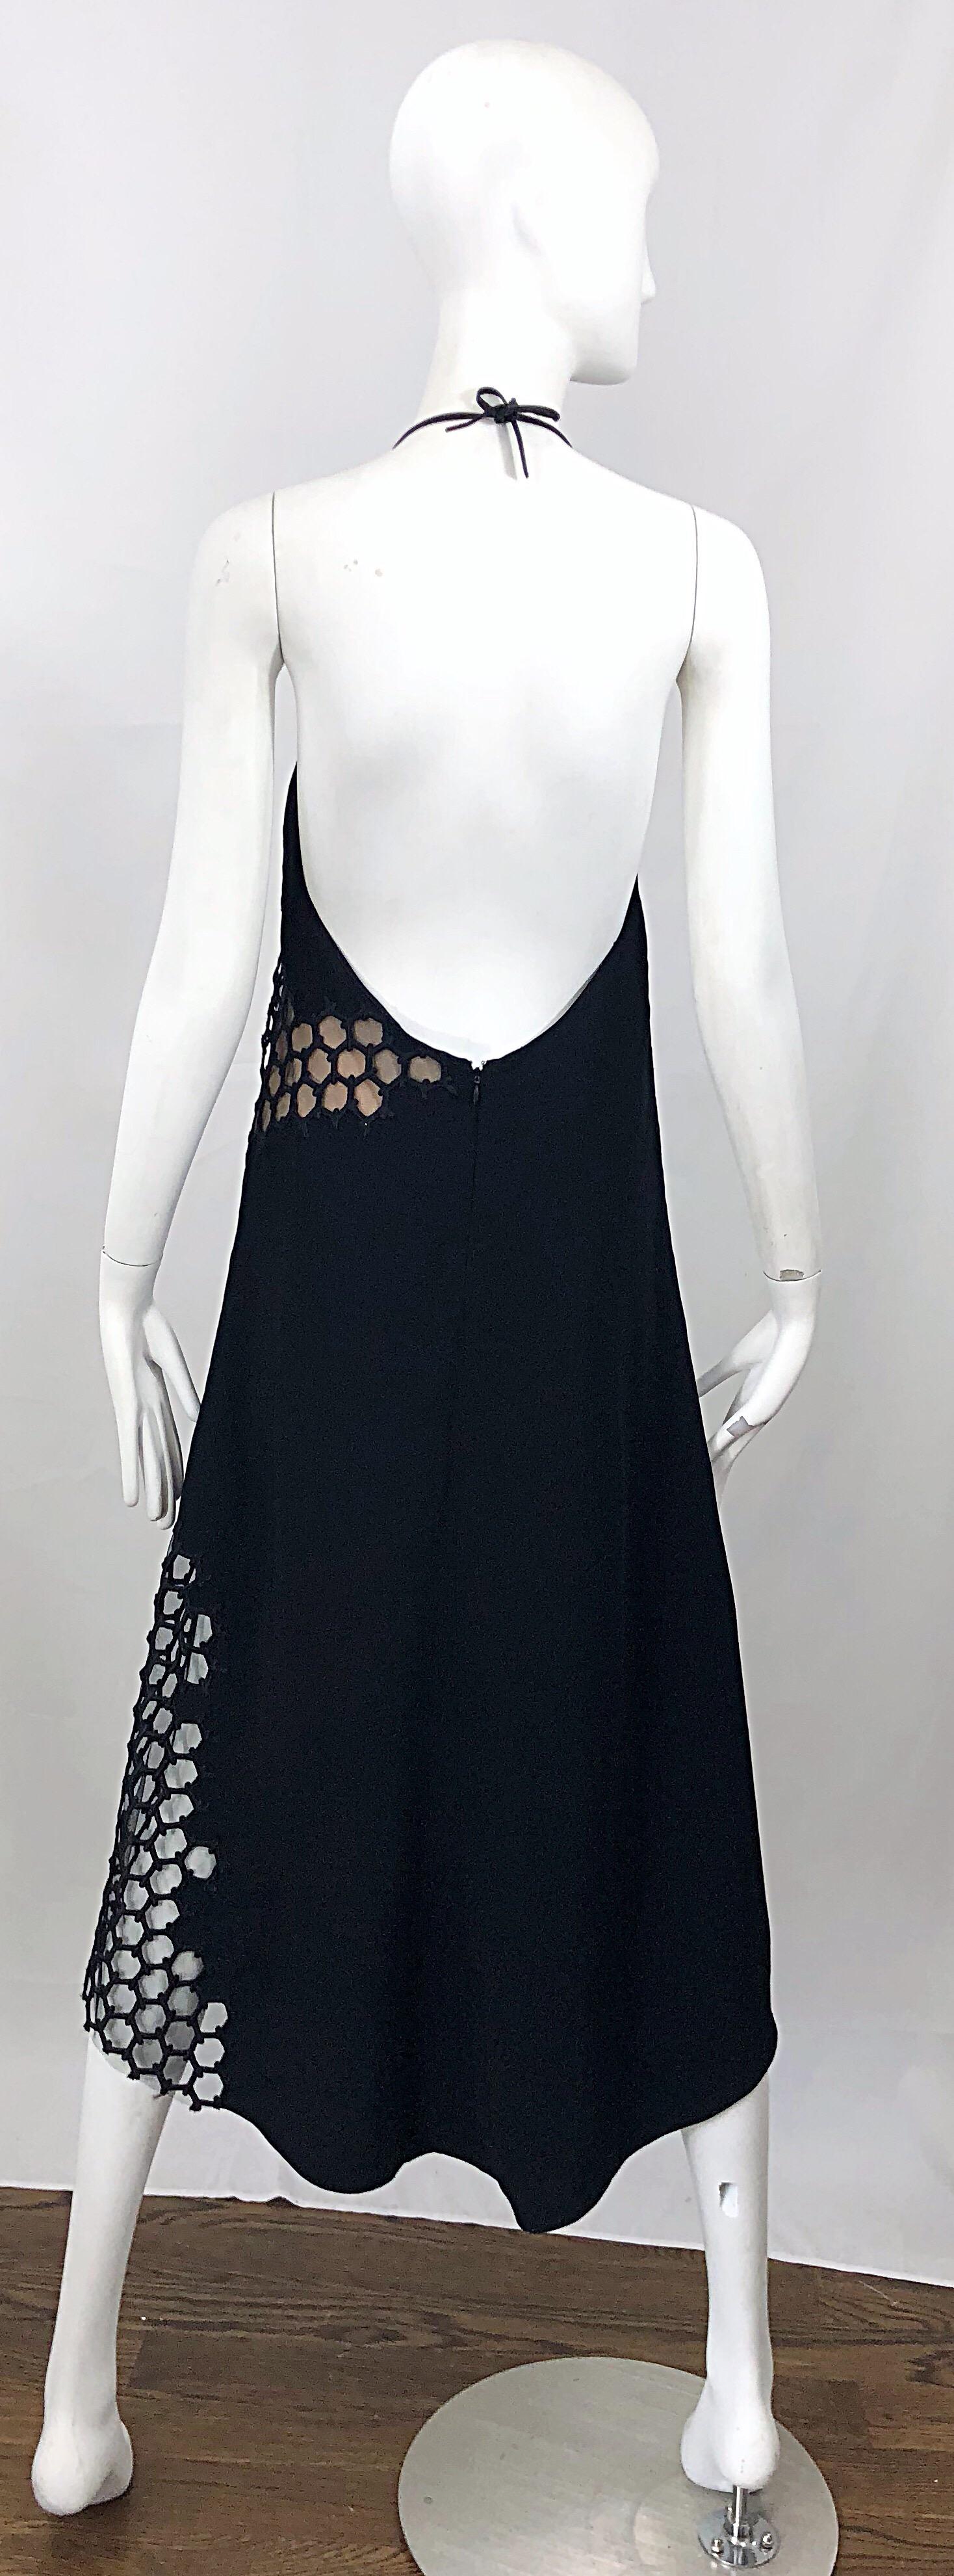 Reed Krakoff Spring 2015 Runway Size 2 / 4 Black Nude Cut Out Halter Dress For Sale 2